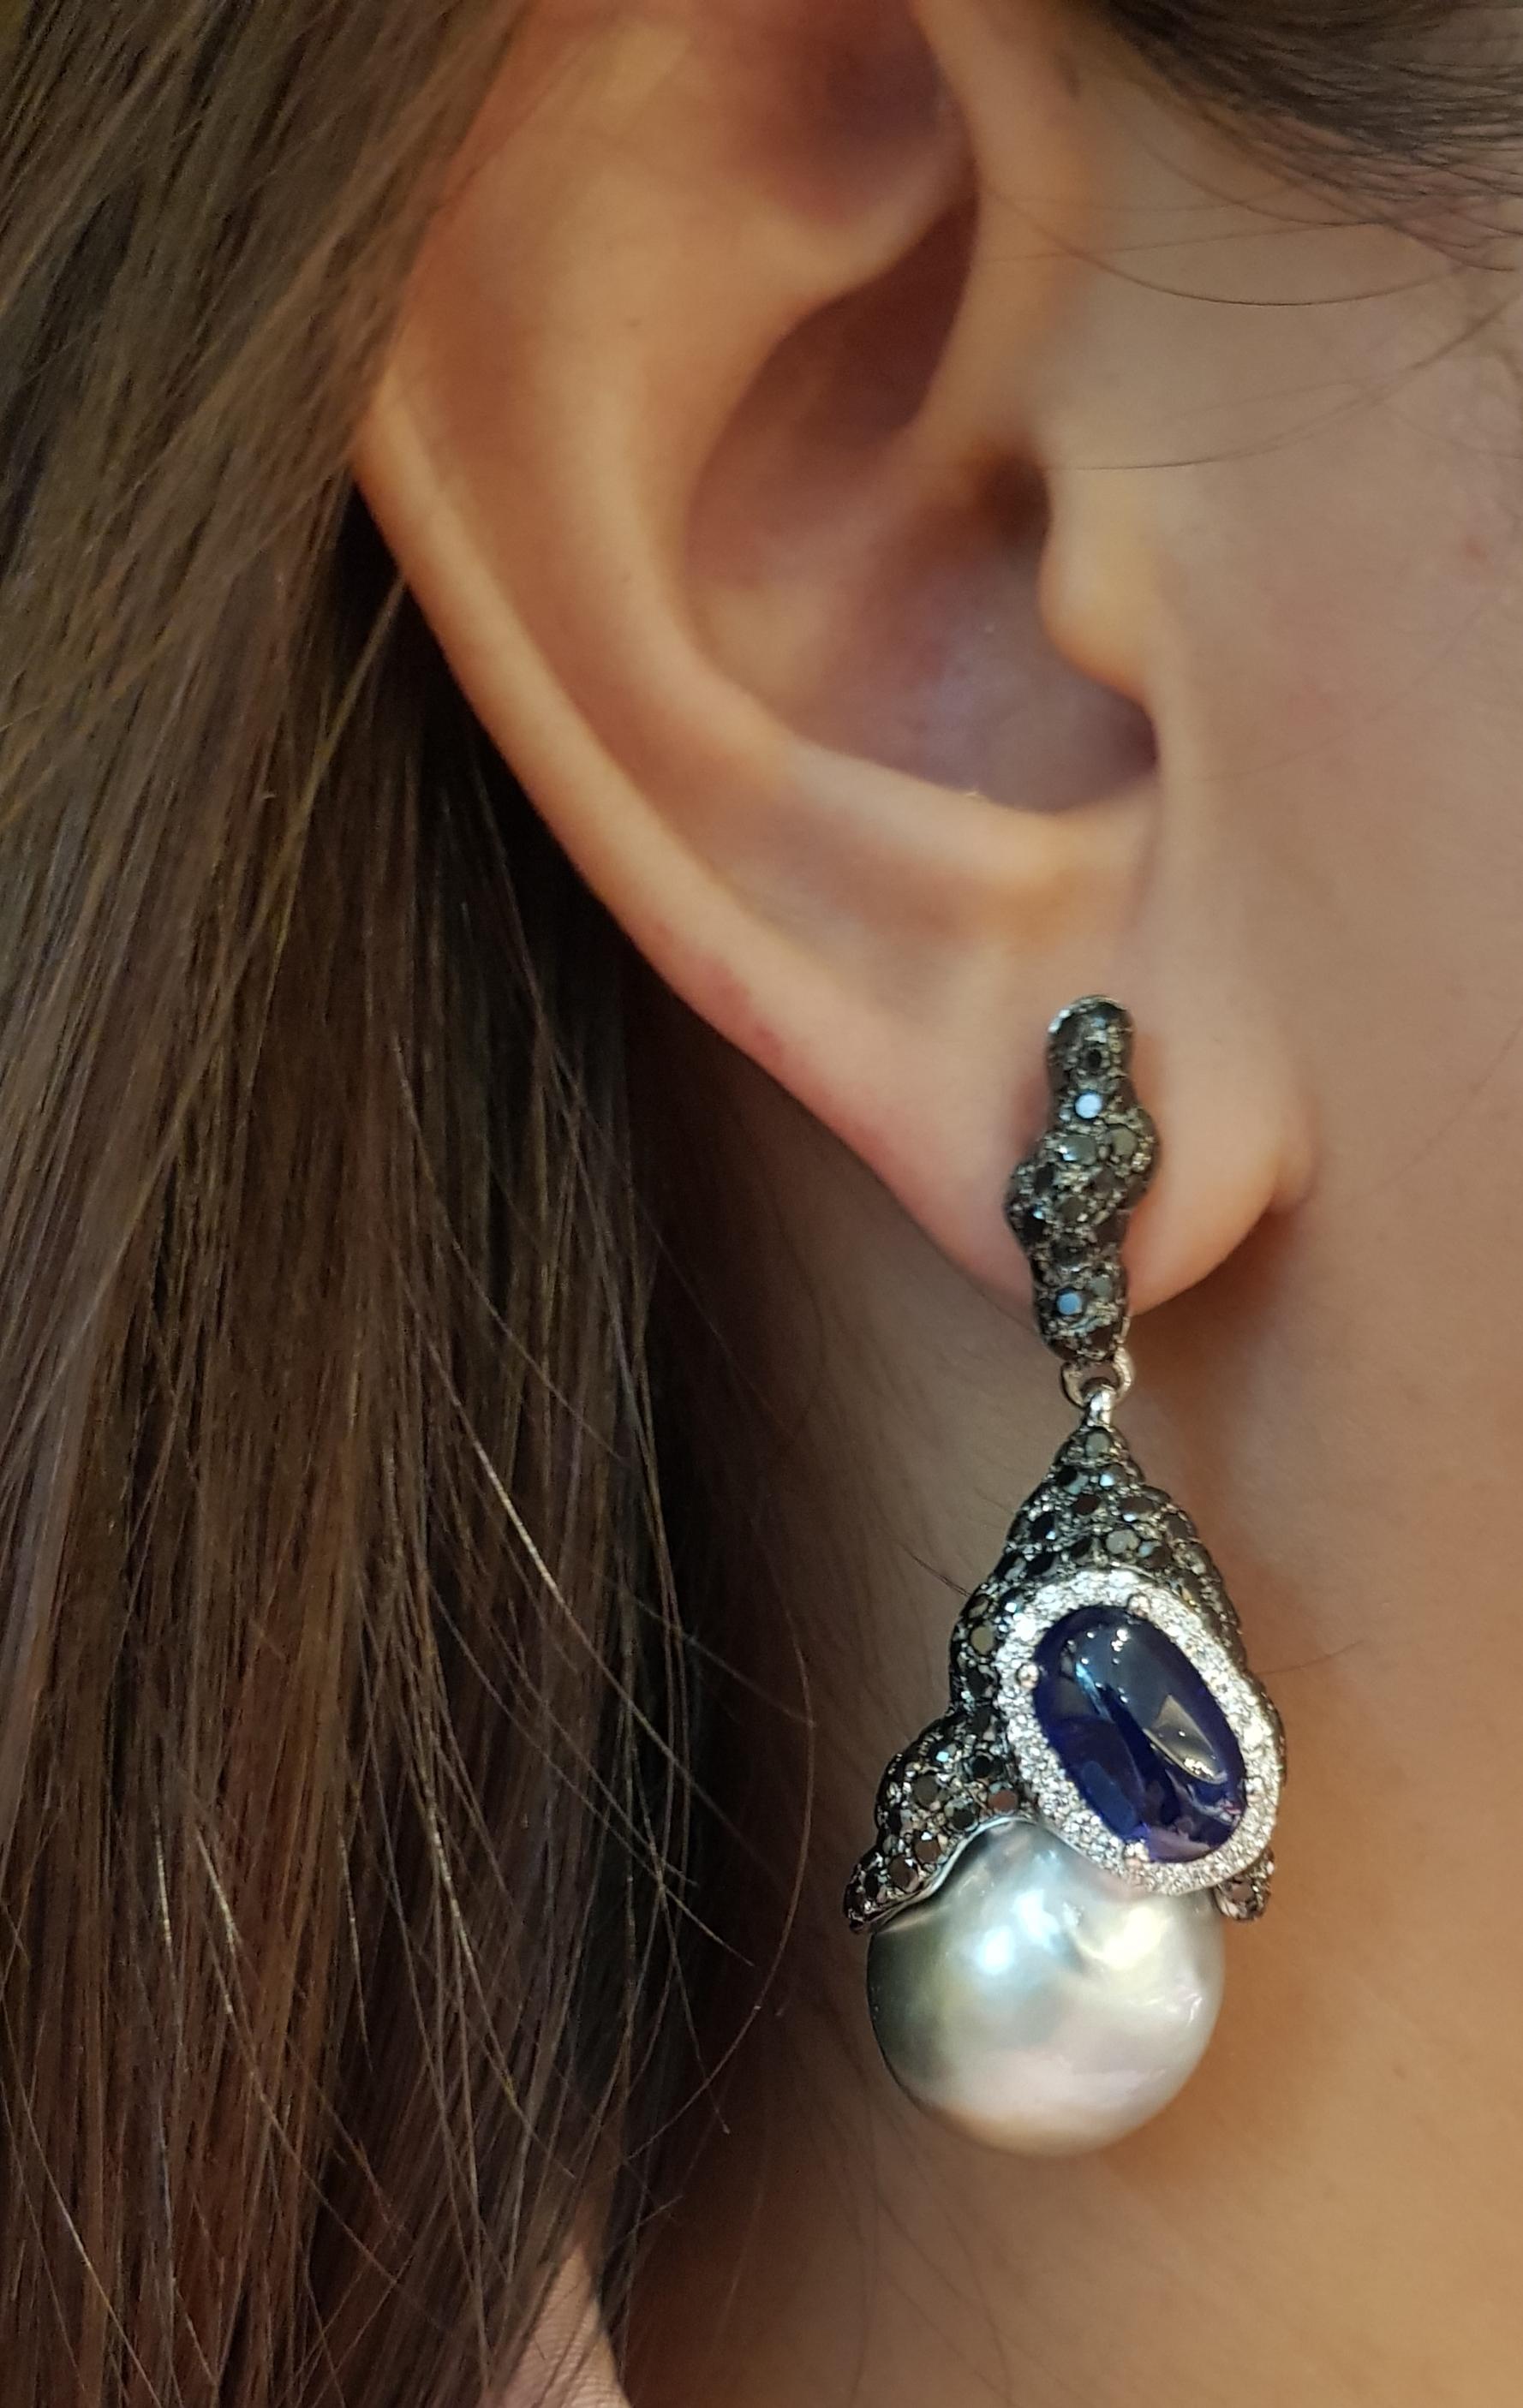 South Sea Pearl, Cabochon Blue Sapphire 6.40carats, Black Diamond  4.55 carats and Diamond 0.50 carat Earrings set in 18 Karat White Gold Settings

Width:  2.0 cm 
Length:  5.1 cm
Total Weight: 34.95 grams

